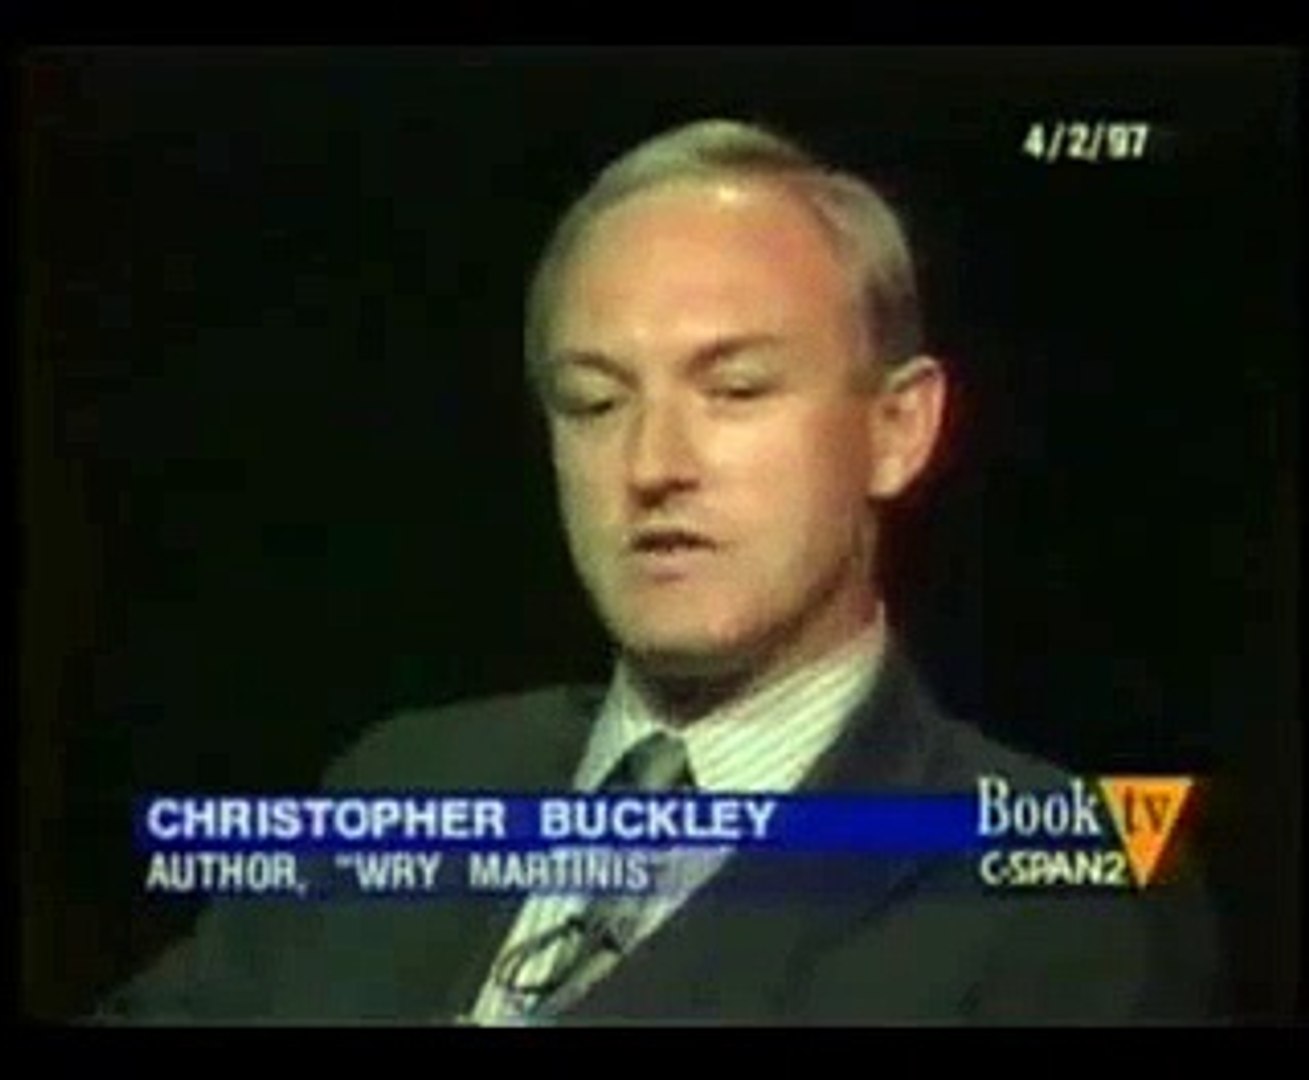 Christopher Buckley Author Interview: Wry Martinis Political Humor Book (1997)